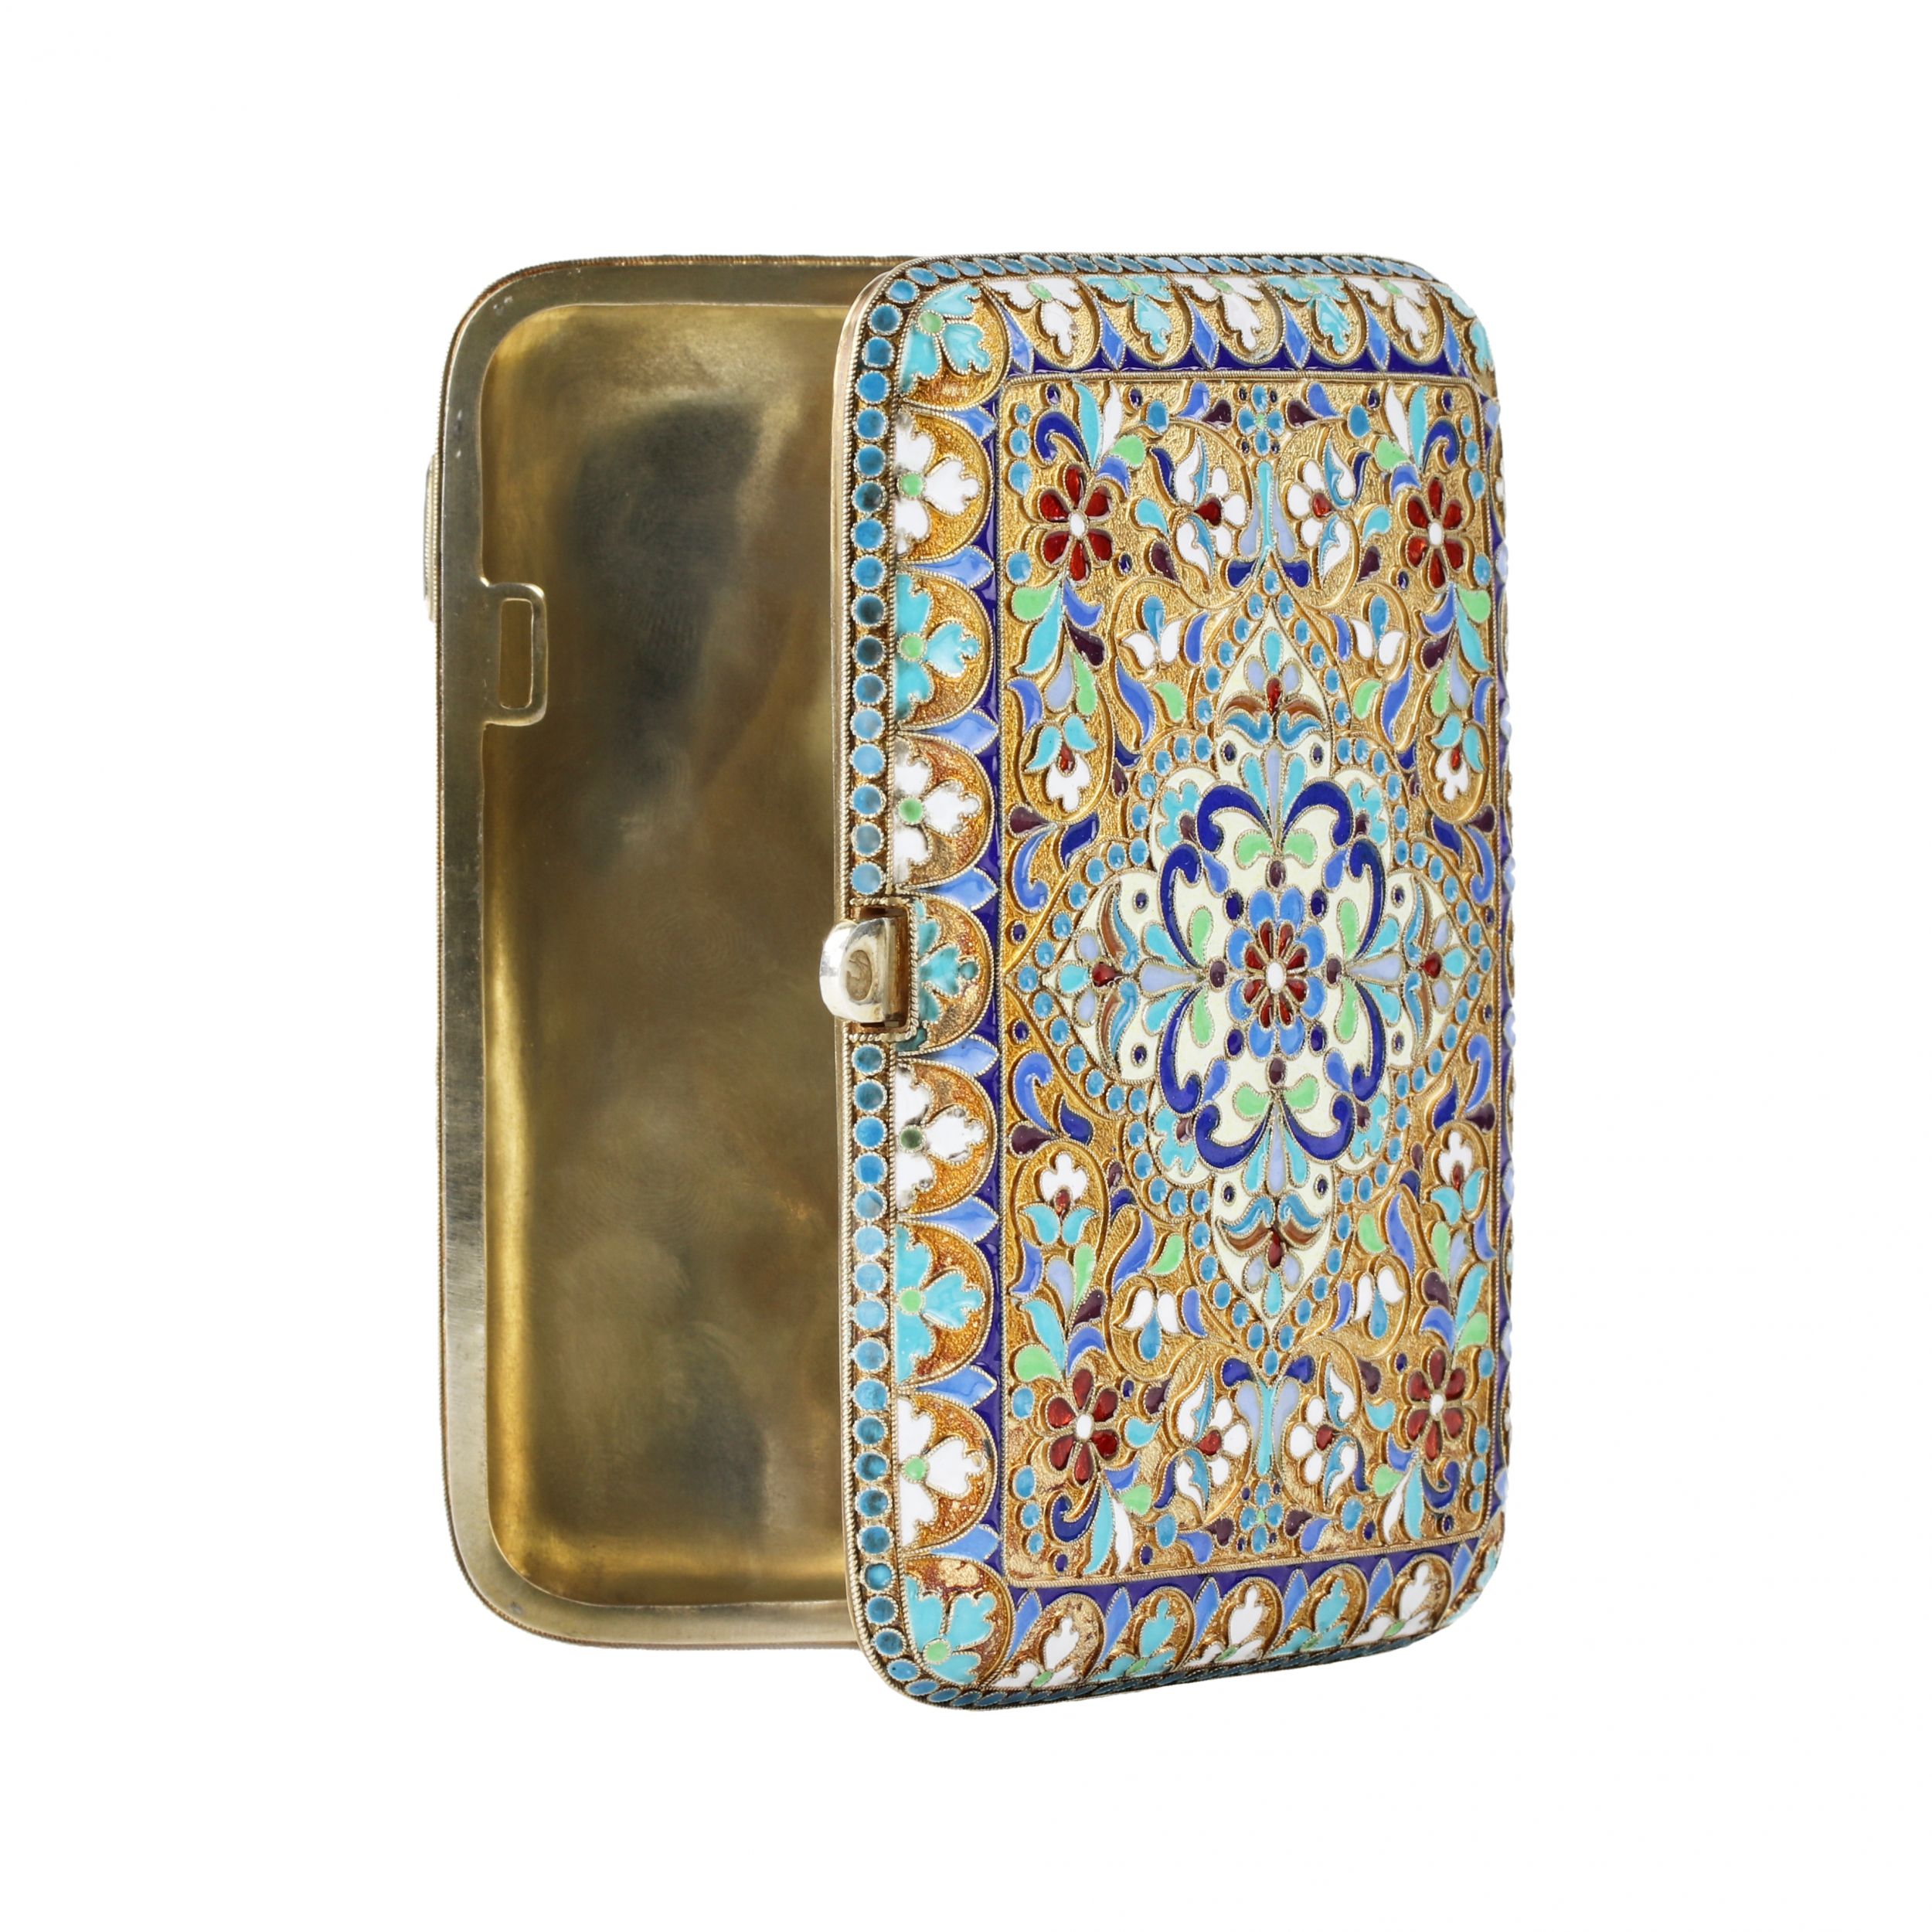 Silver cigarette case with gilding and cloisonne enamels. - Image 8 of 12